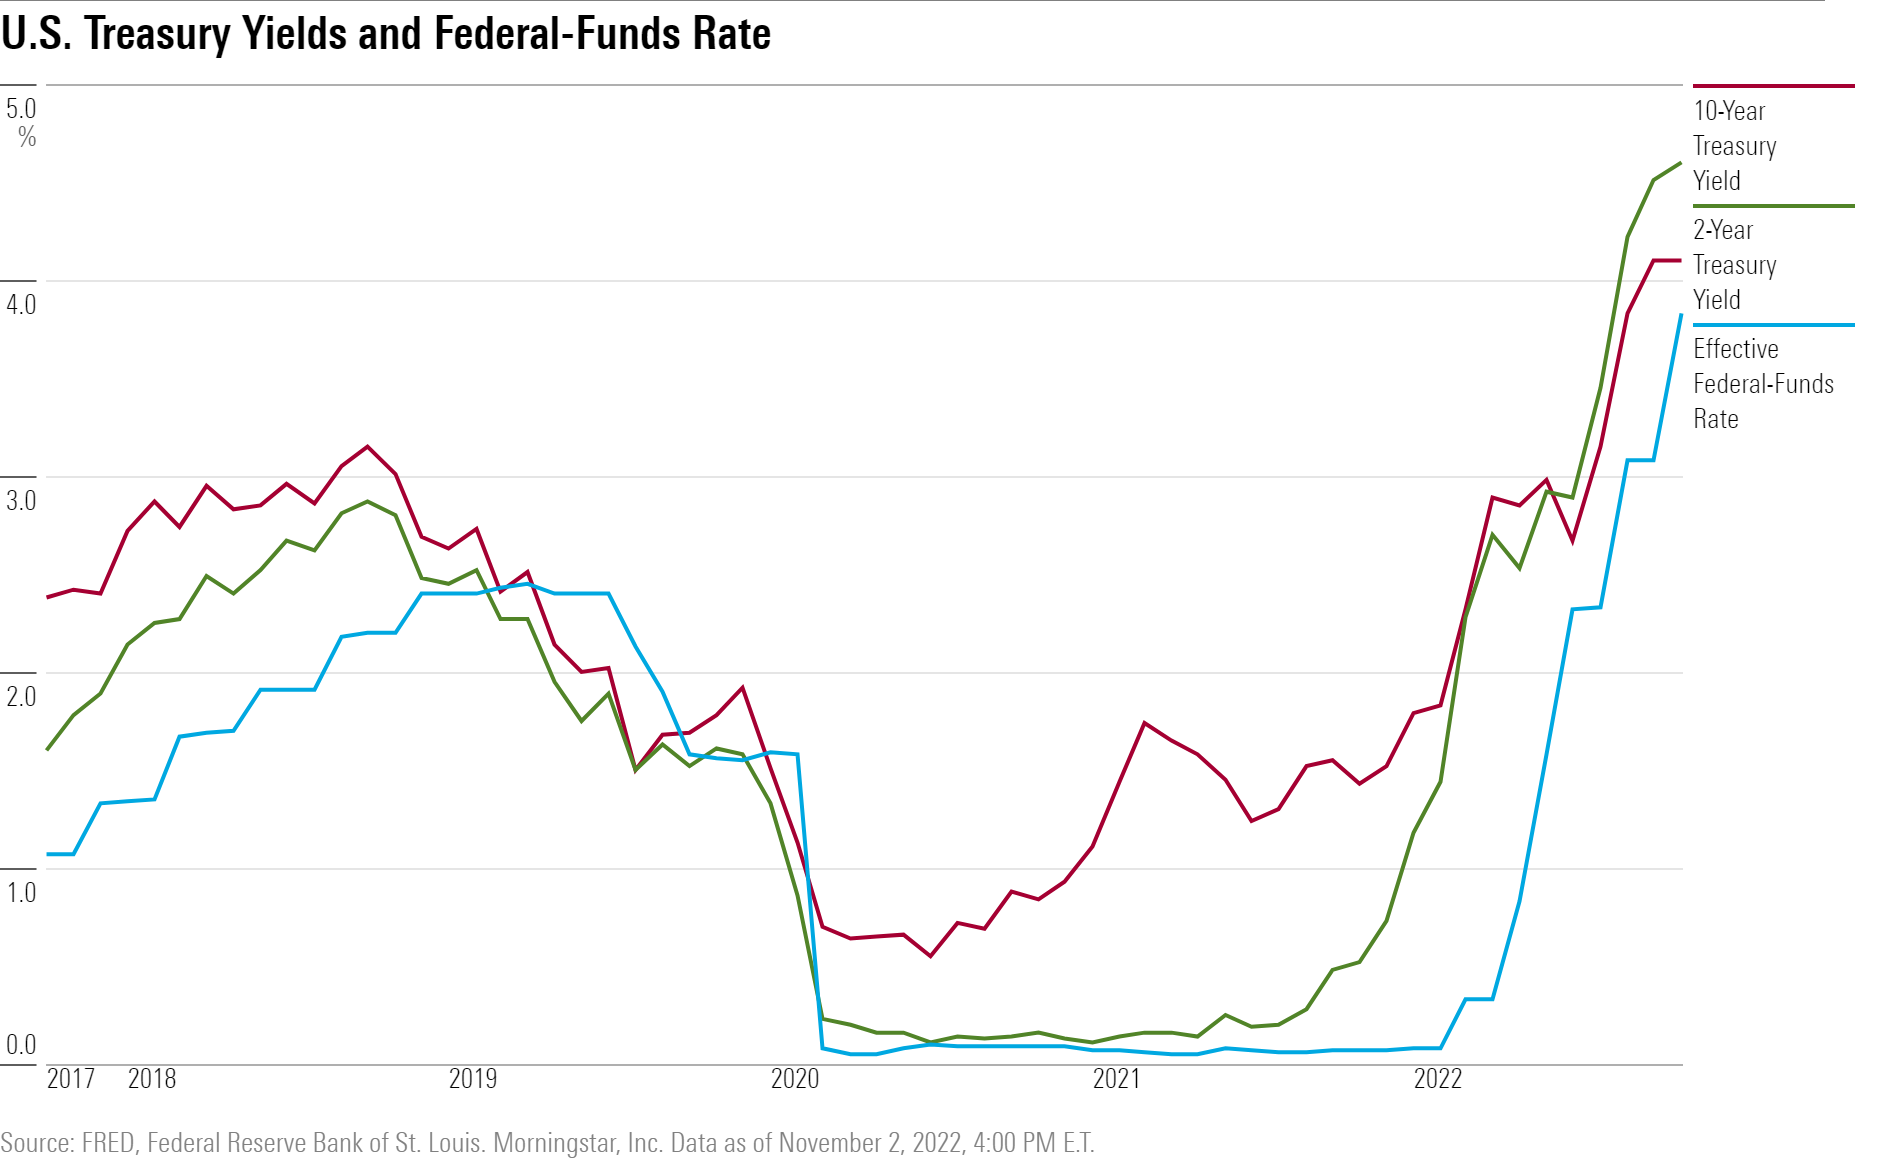 A line chart showing U.S. treasury yields vs. the federal funds rate in the last 5-years.